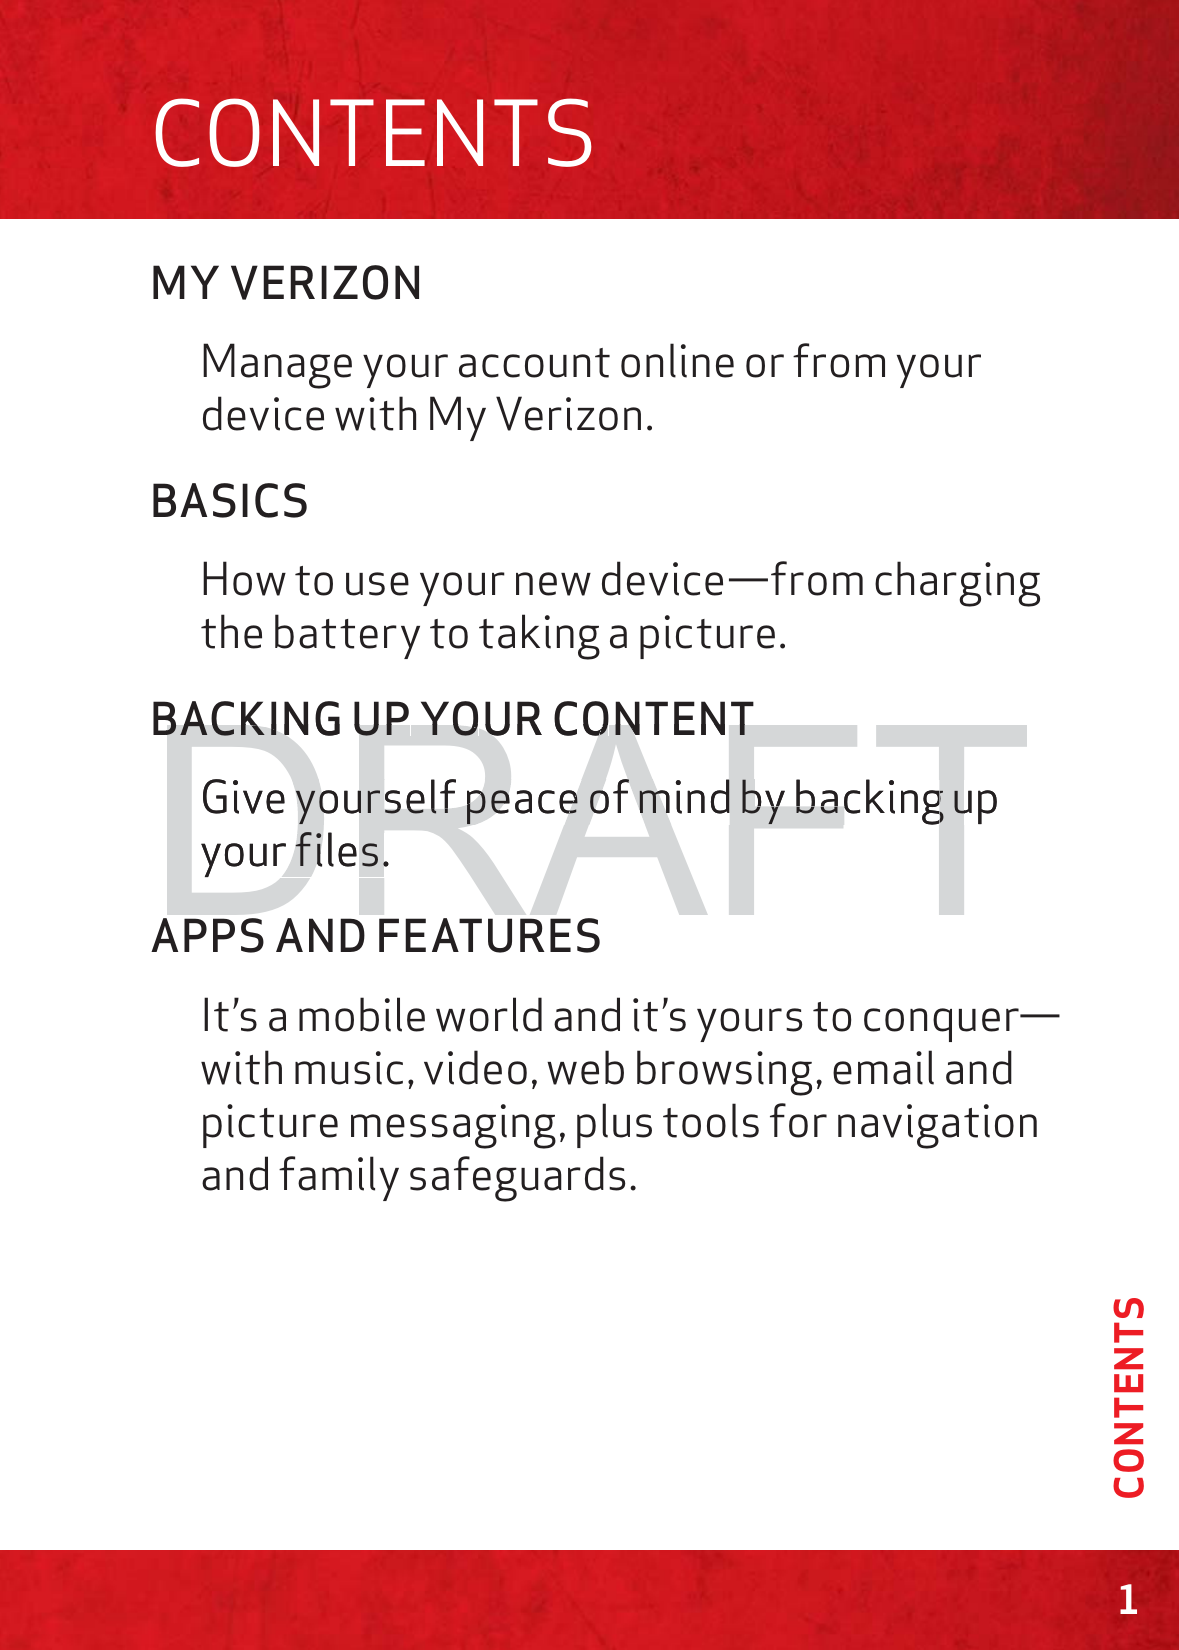 MY VERIZONManage your account online or from your device with My Verizon.BASICSHow to use your new device—from charging the battery to taking a picture.BACKING UP YOUR CONTENTGive yourself peace of mind by backing up your files.APPS AND FEATURESIt’s a mobile world and it’s yours to conquer—with music, video, web browsing, email and picture messaging, plus tools for navigation and family safeguards.  1CONTENTSCONTENTSDRAFTBBACACKKINING UPUP YOYOUURCOONNTENTTGive yourself peace of mind by backing up yourself peace of mind by backing uyour files.r files.